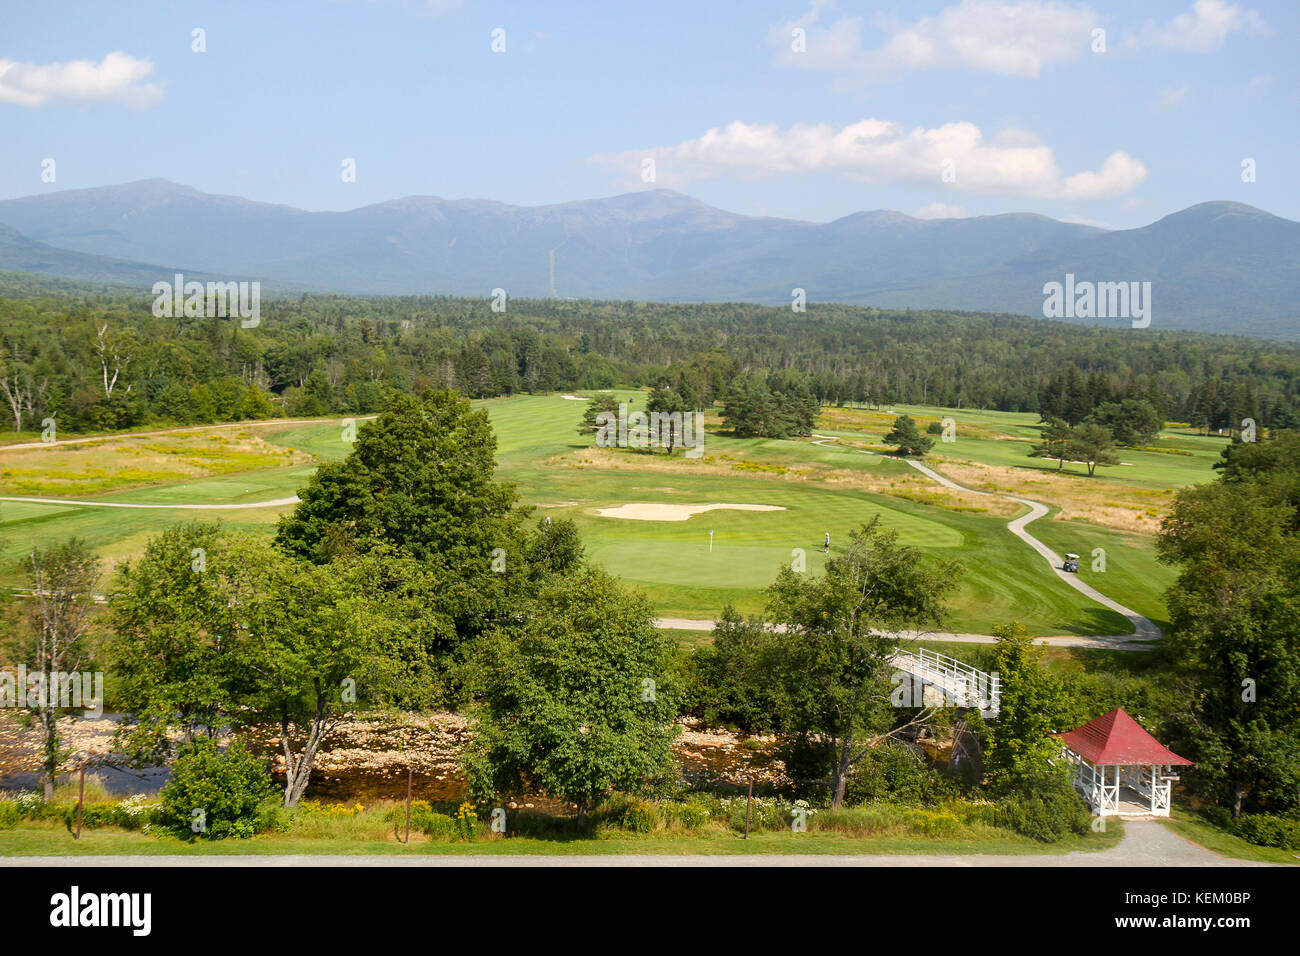 View of the golf course and mountains behind the Omni Mount Washington Resort, Bretton Woods, New Hampshire, United States Stock Photo